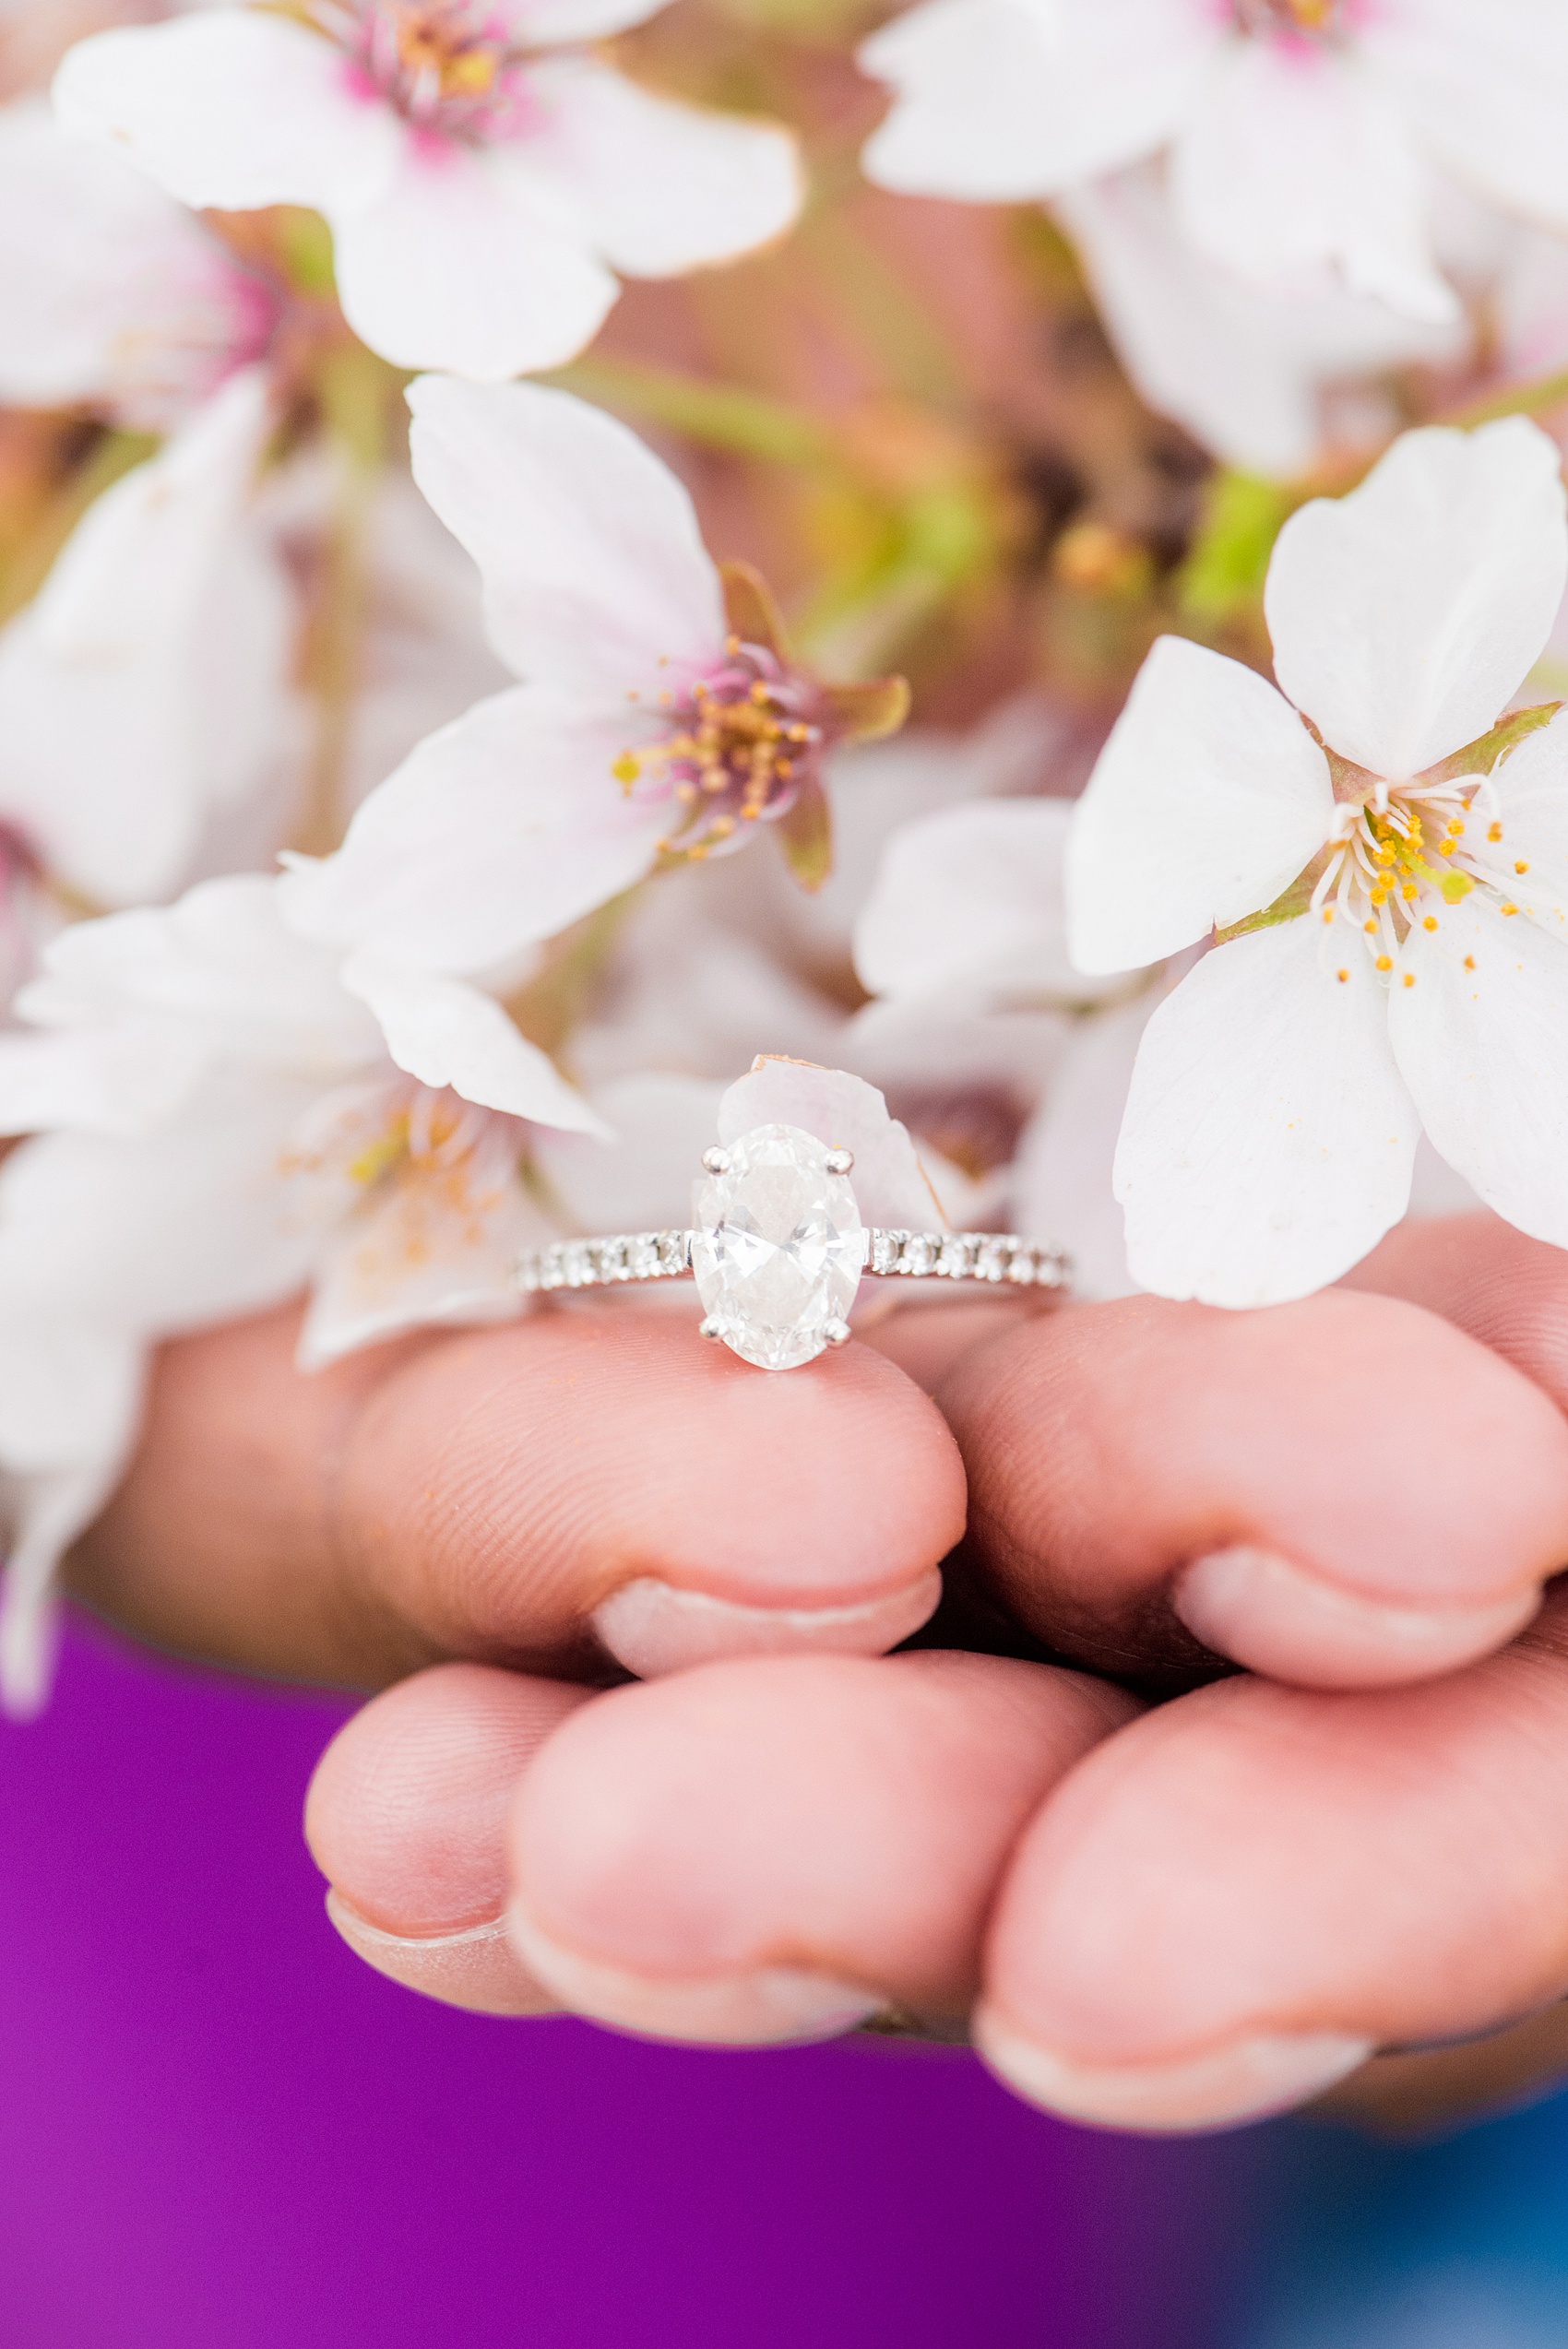 DC Cherry Blossoms Engagement Photos by Mikkel Paige Photography. Spring flowers around the MLK memorial and Tidal Basin at the nation's Capitol with the bride holding a handful of sakura flowers and her oval diamond engagement ring. #DCCherryBlossoms #CherryBlossoms #EngagementPhotos #SpringEngagementPhotos #CherryBlossomsEngagementPhotos